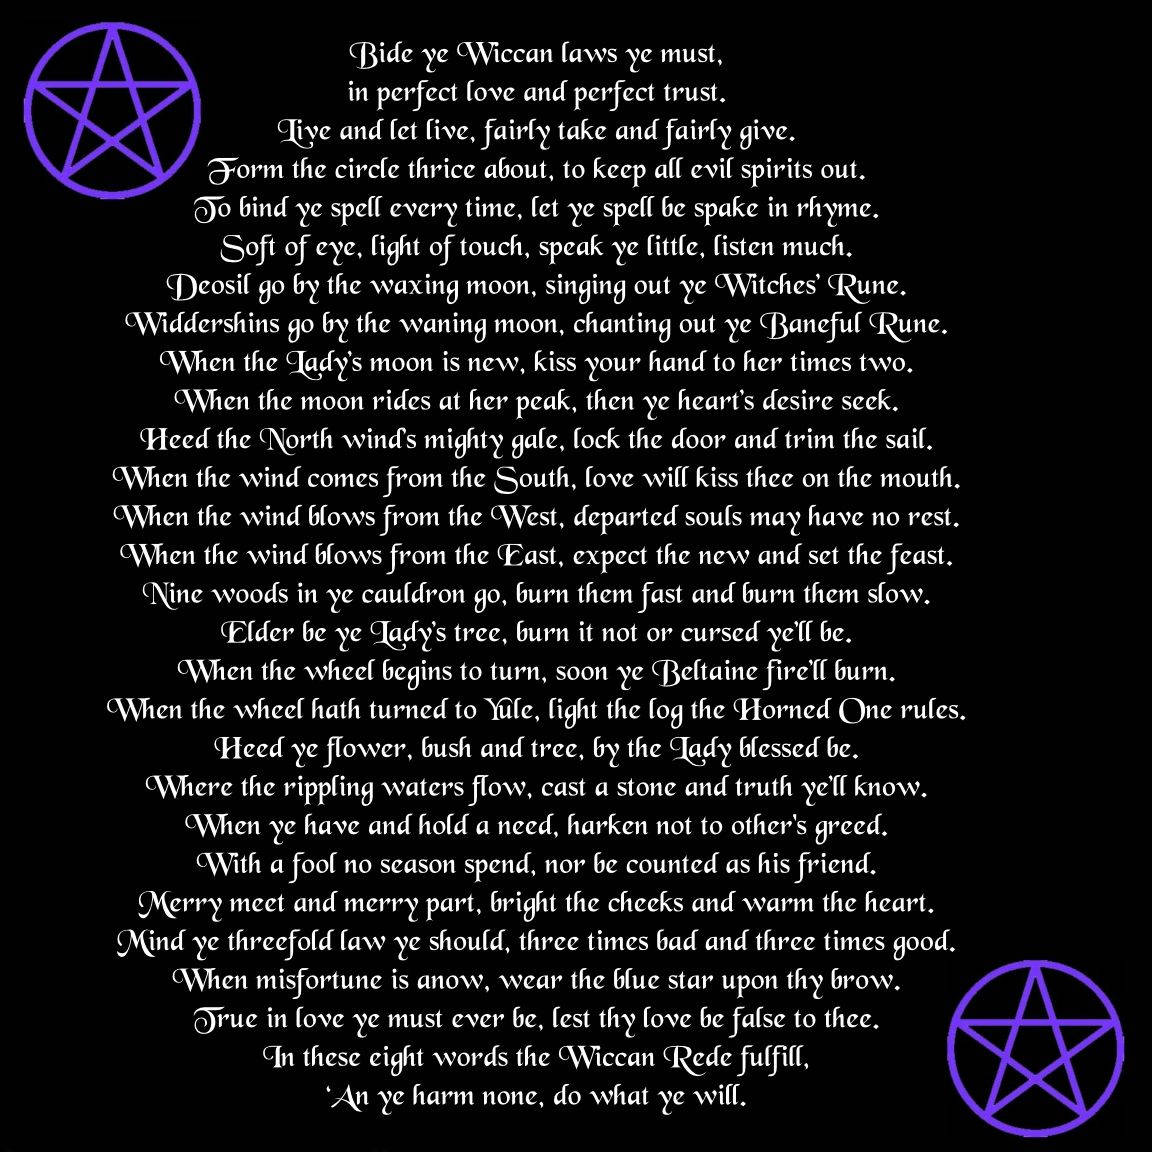 Wiccan Daily Prayer Background